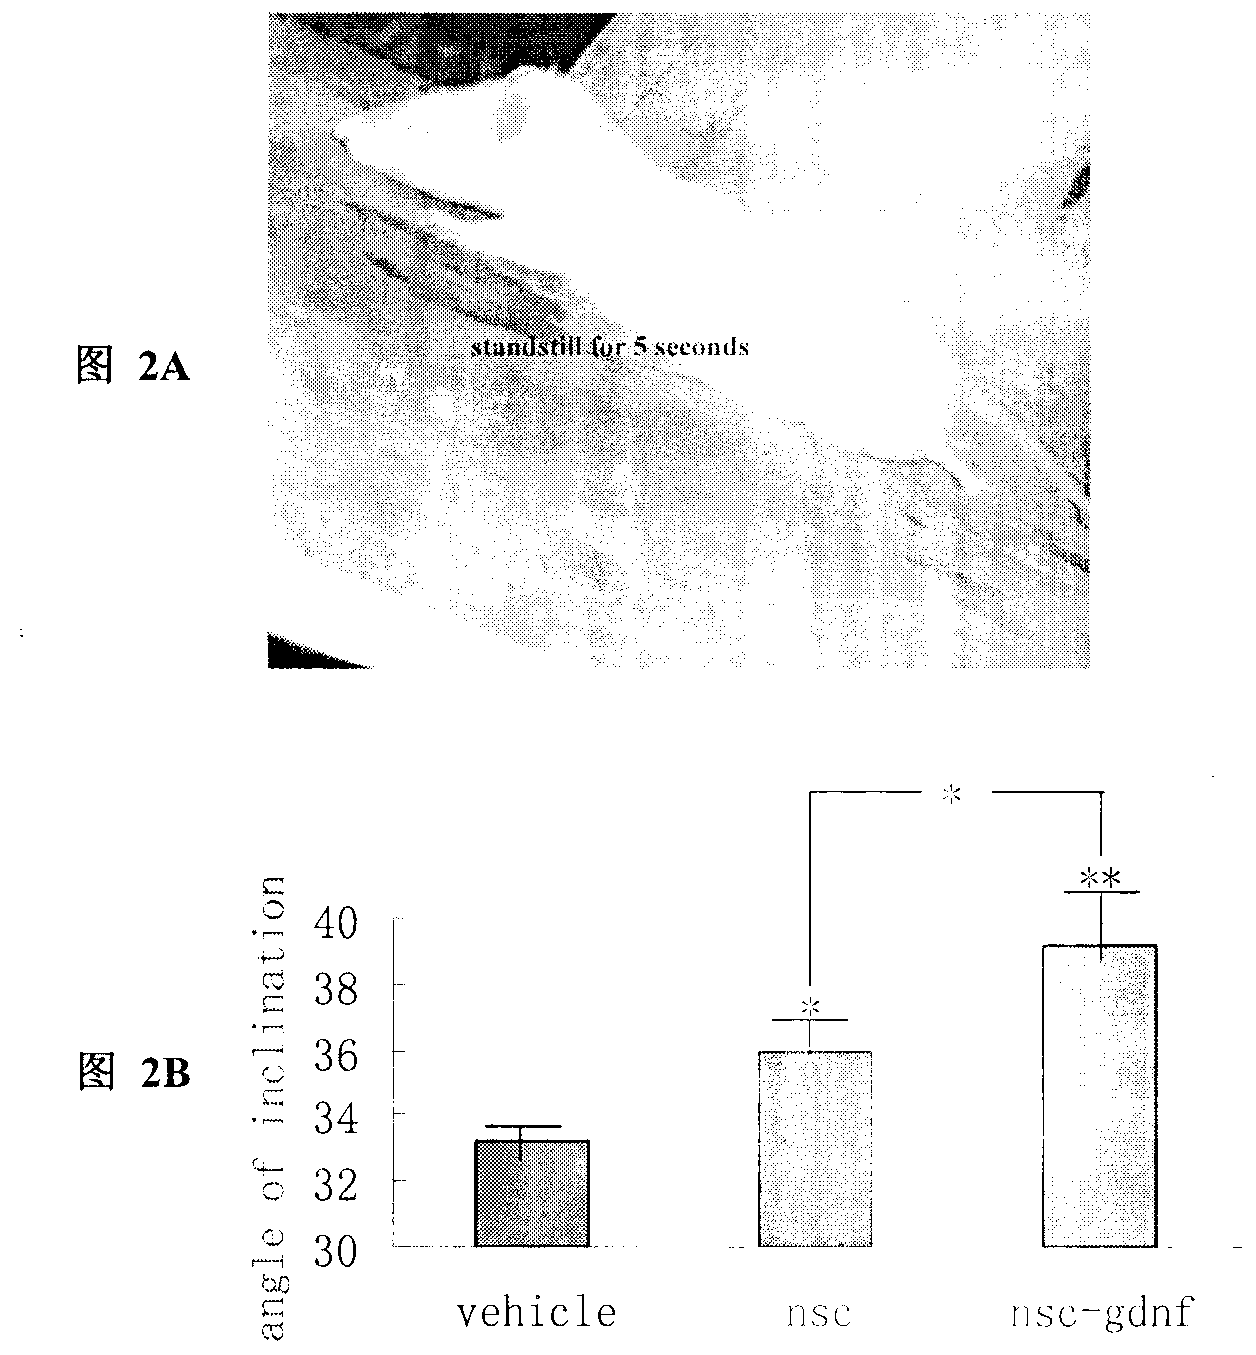 Treatment of spinal cord injury by transplanting stem cells modified by neurotrophic factor gene